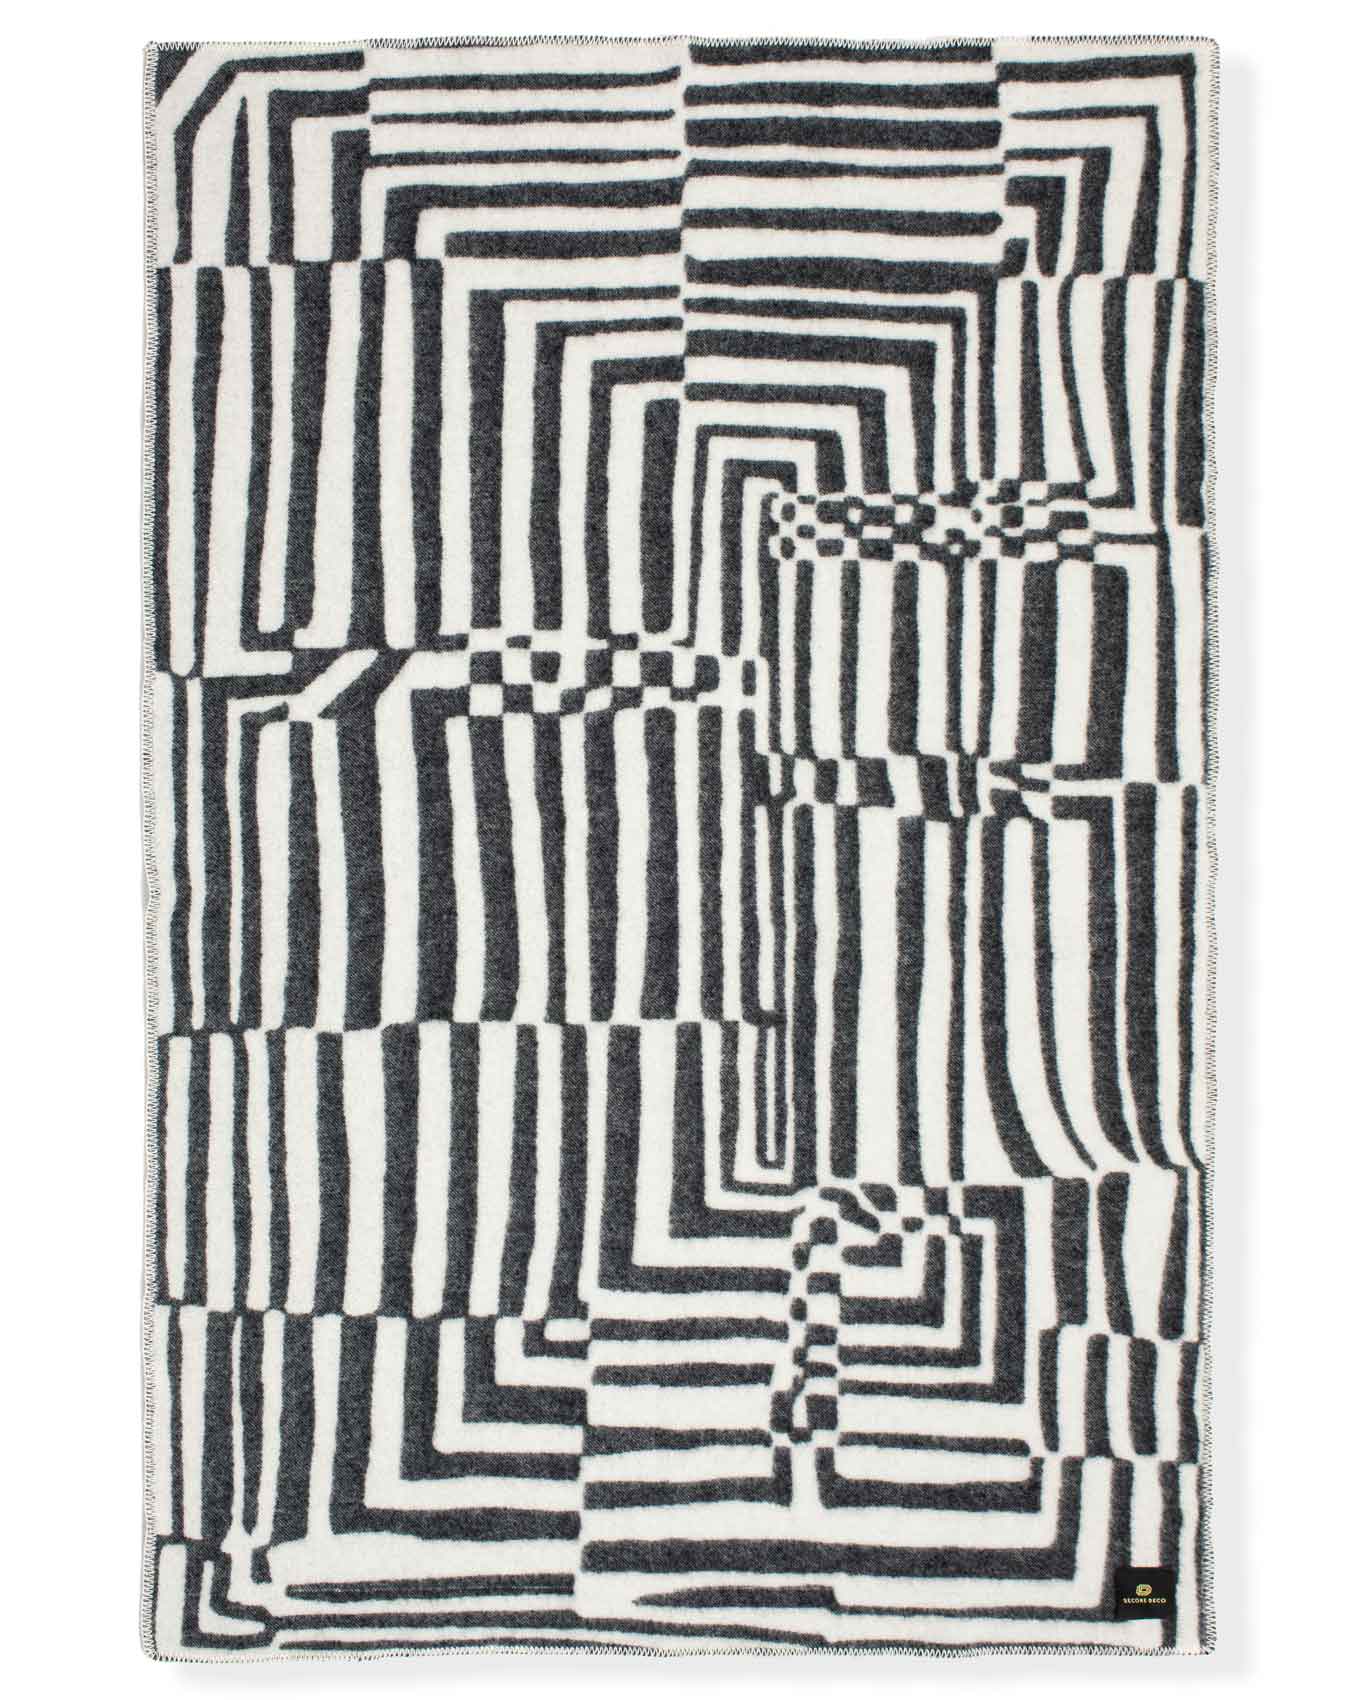 "Obscure Chess" Pure Wool Blanket by Jonathan Ryan Storm. Black/White